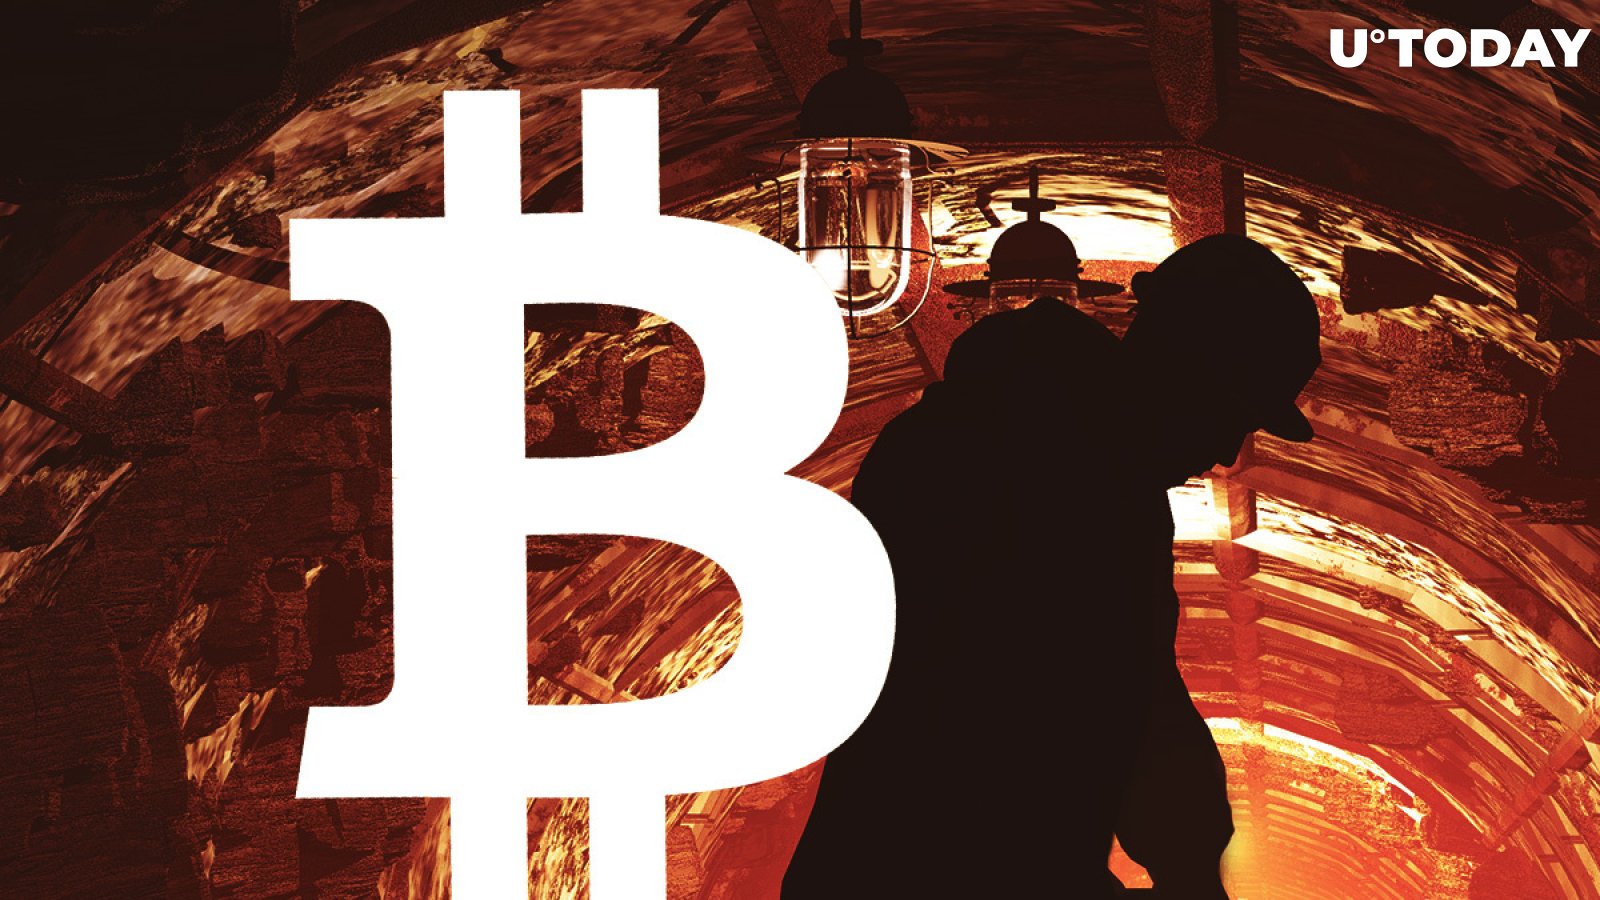 Bitcoin (BTC) Miners May Start Quitting, Expect Hash Rate to Drop: Crypto Manager